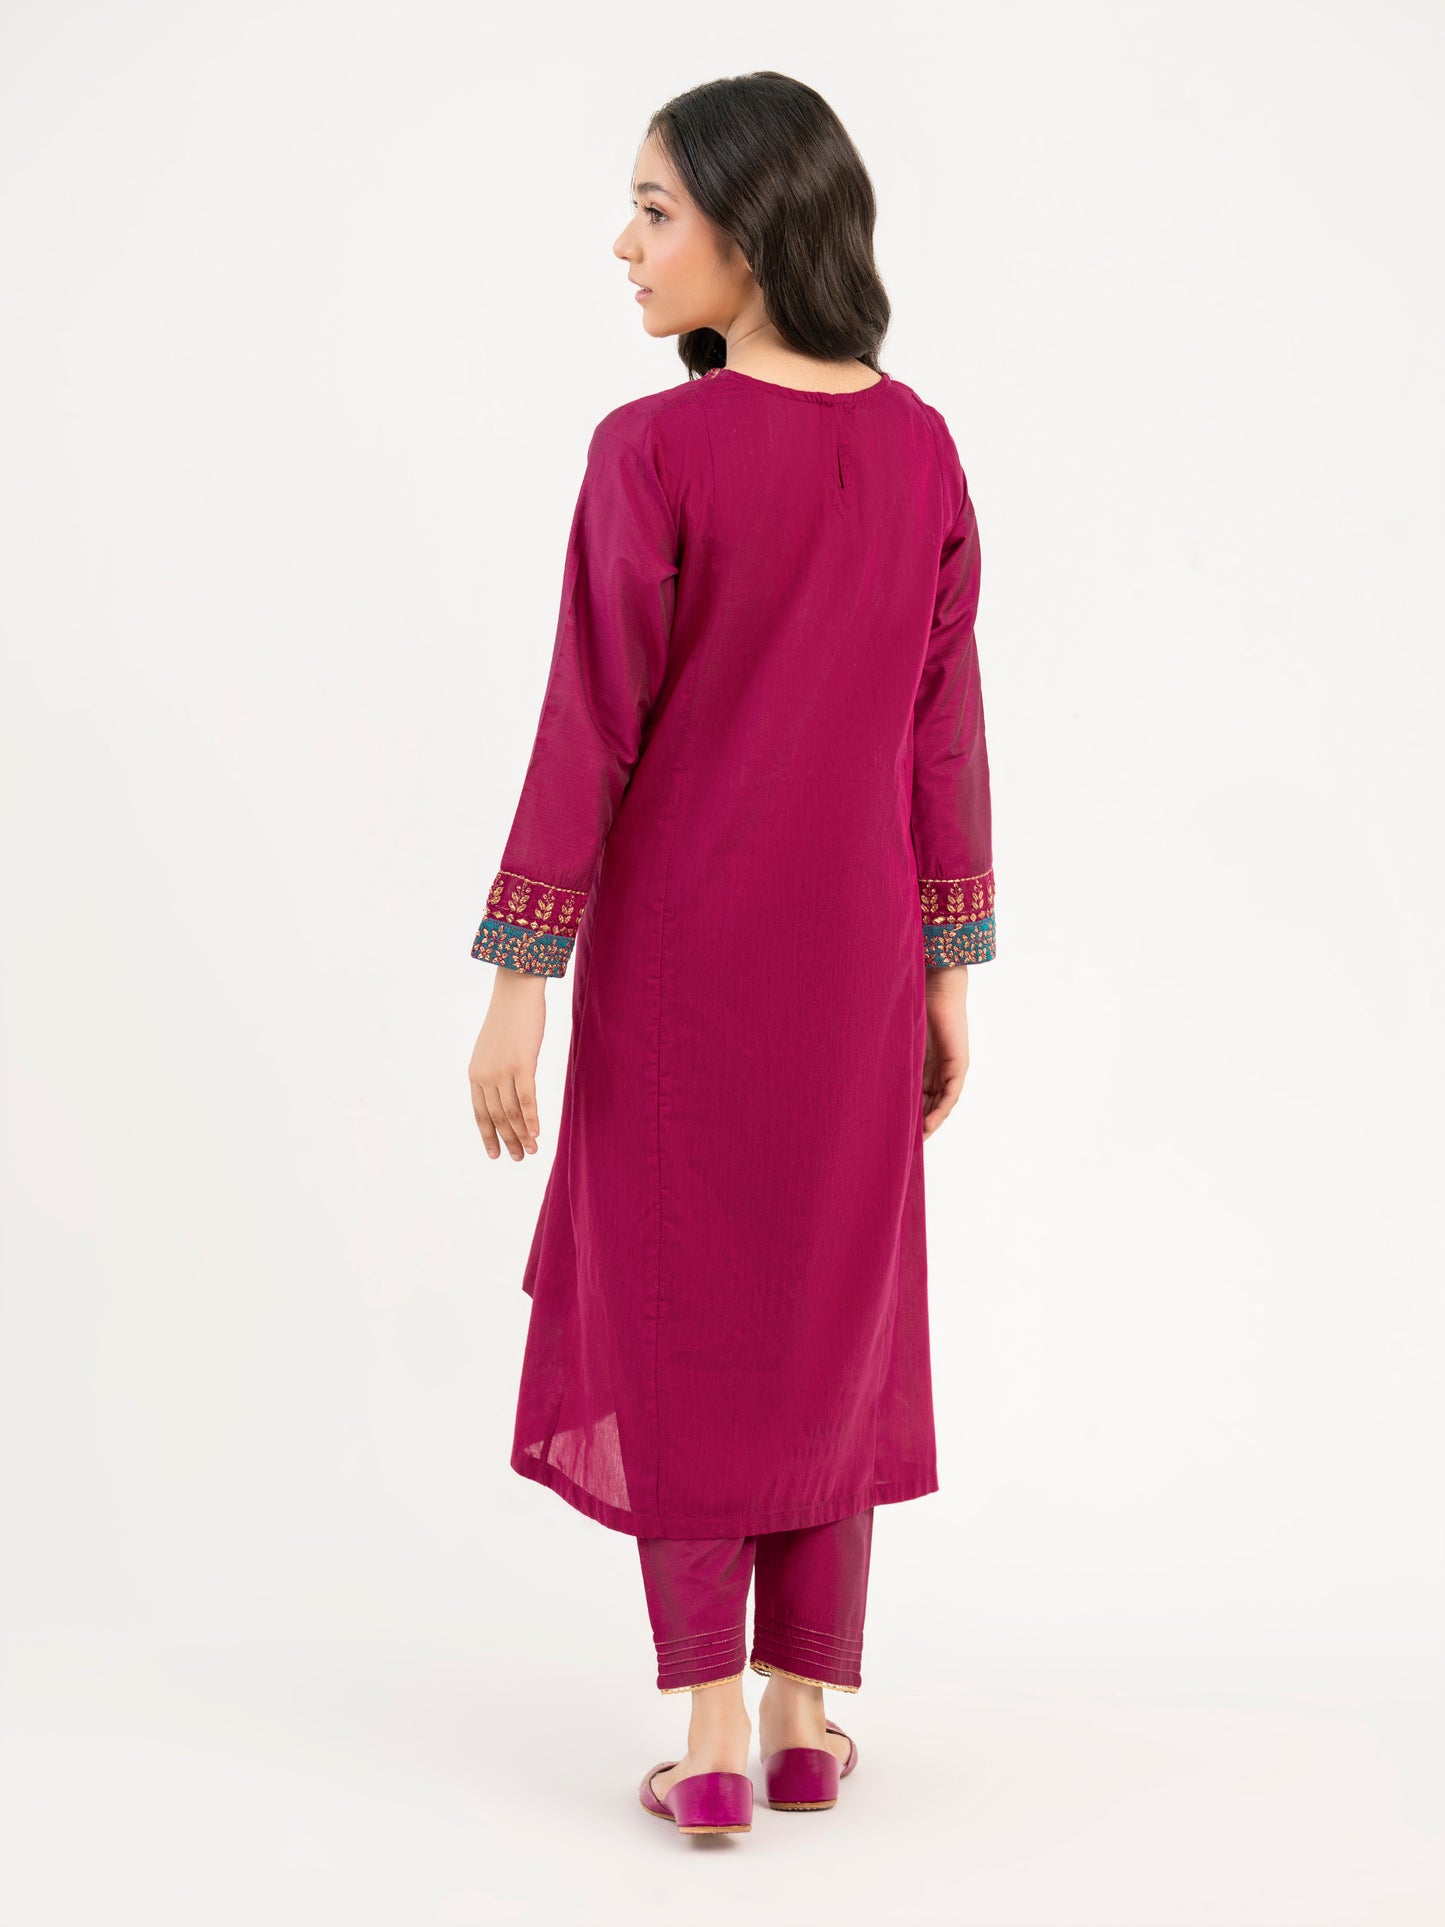 2 Piece Raw Silk Suit-Embroidered (Pret)